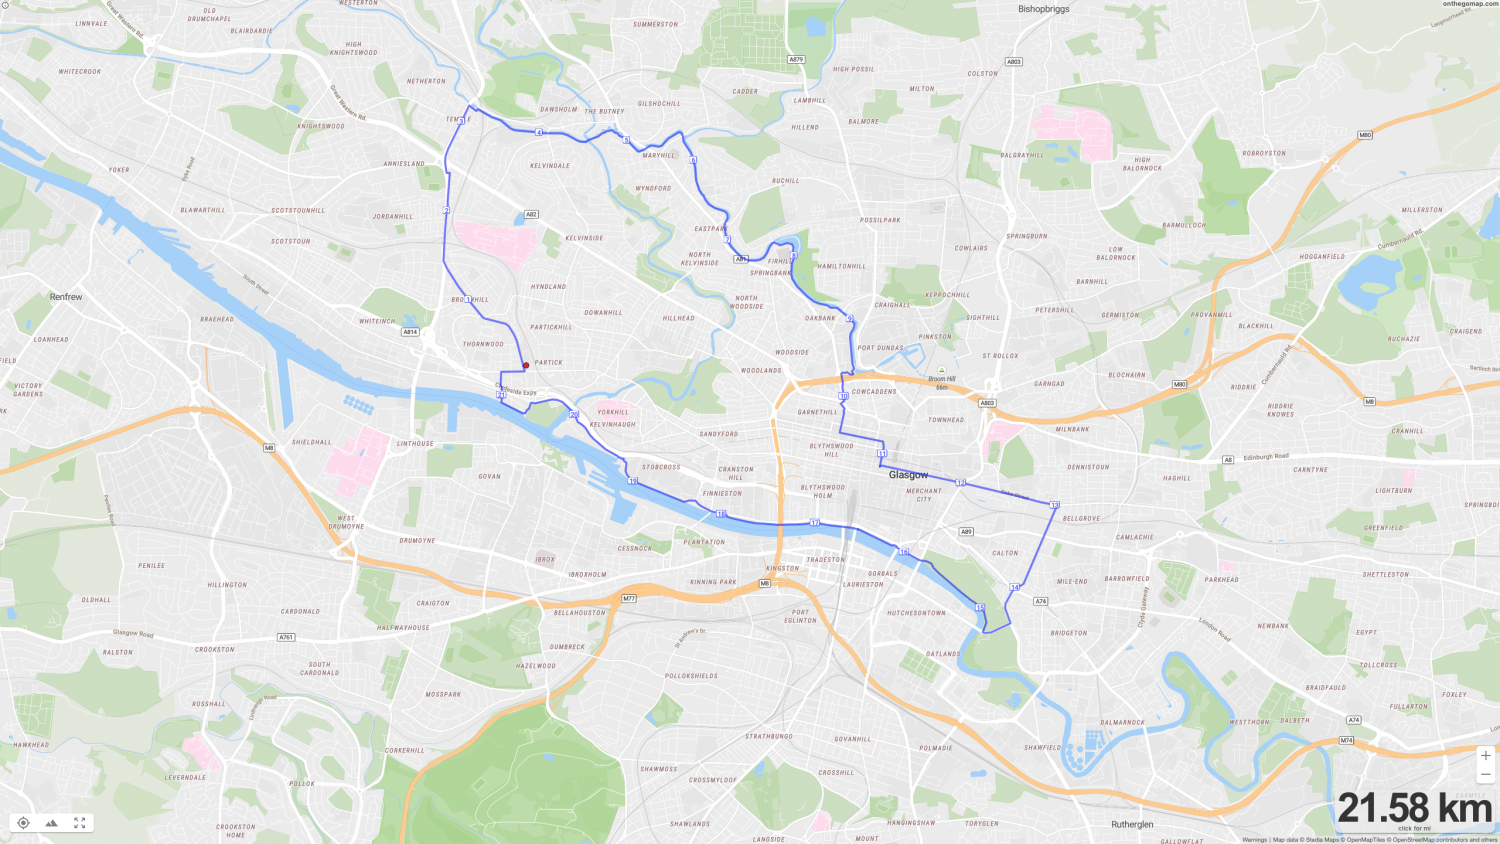 Glasgow West End, Forth and Clyde Canal and Clydeside Running Route